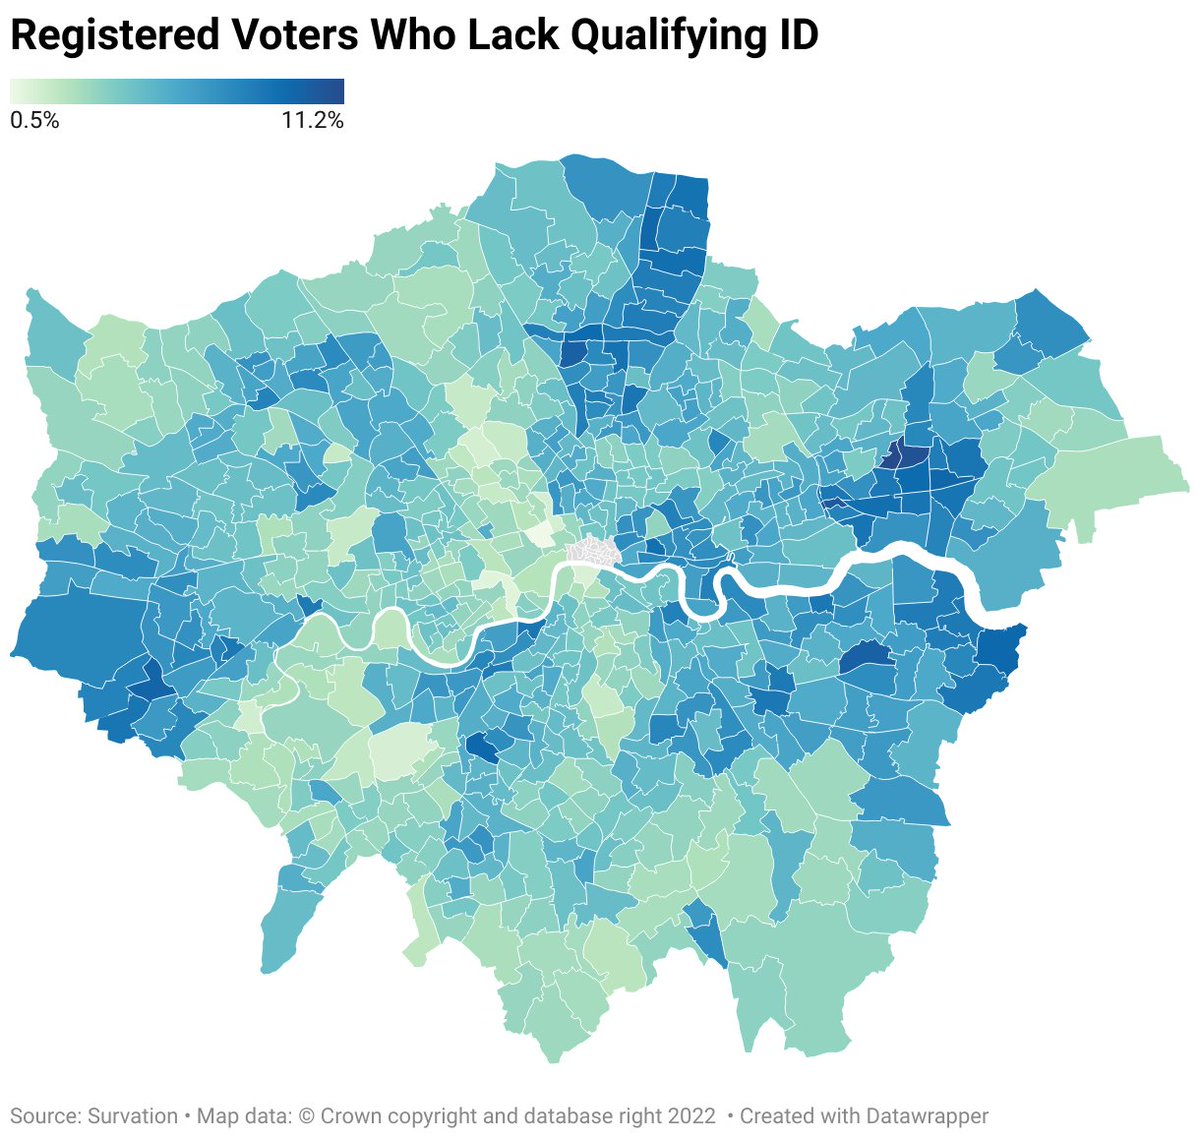 New: 5% of registered voters in London lack a valid form of photo ID Ward level estimates show that this the highest in Becontree - 11% (Barking and Dagenham) and lowest in Bloomsbury - 0.5% (Camden).